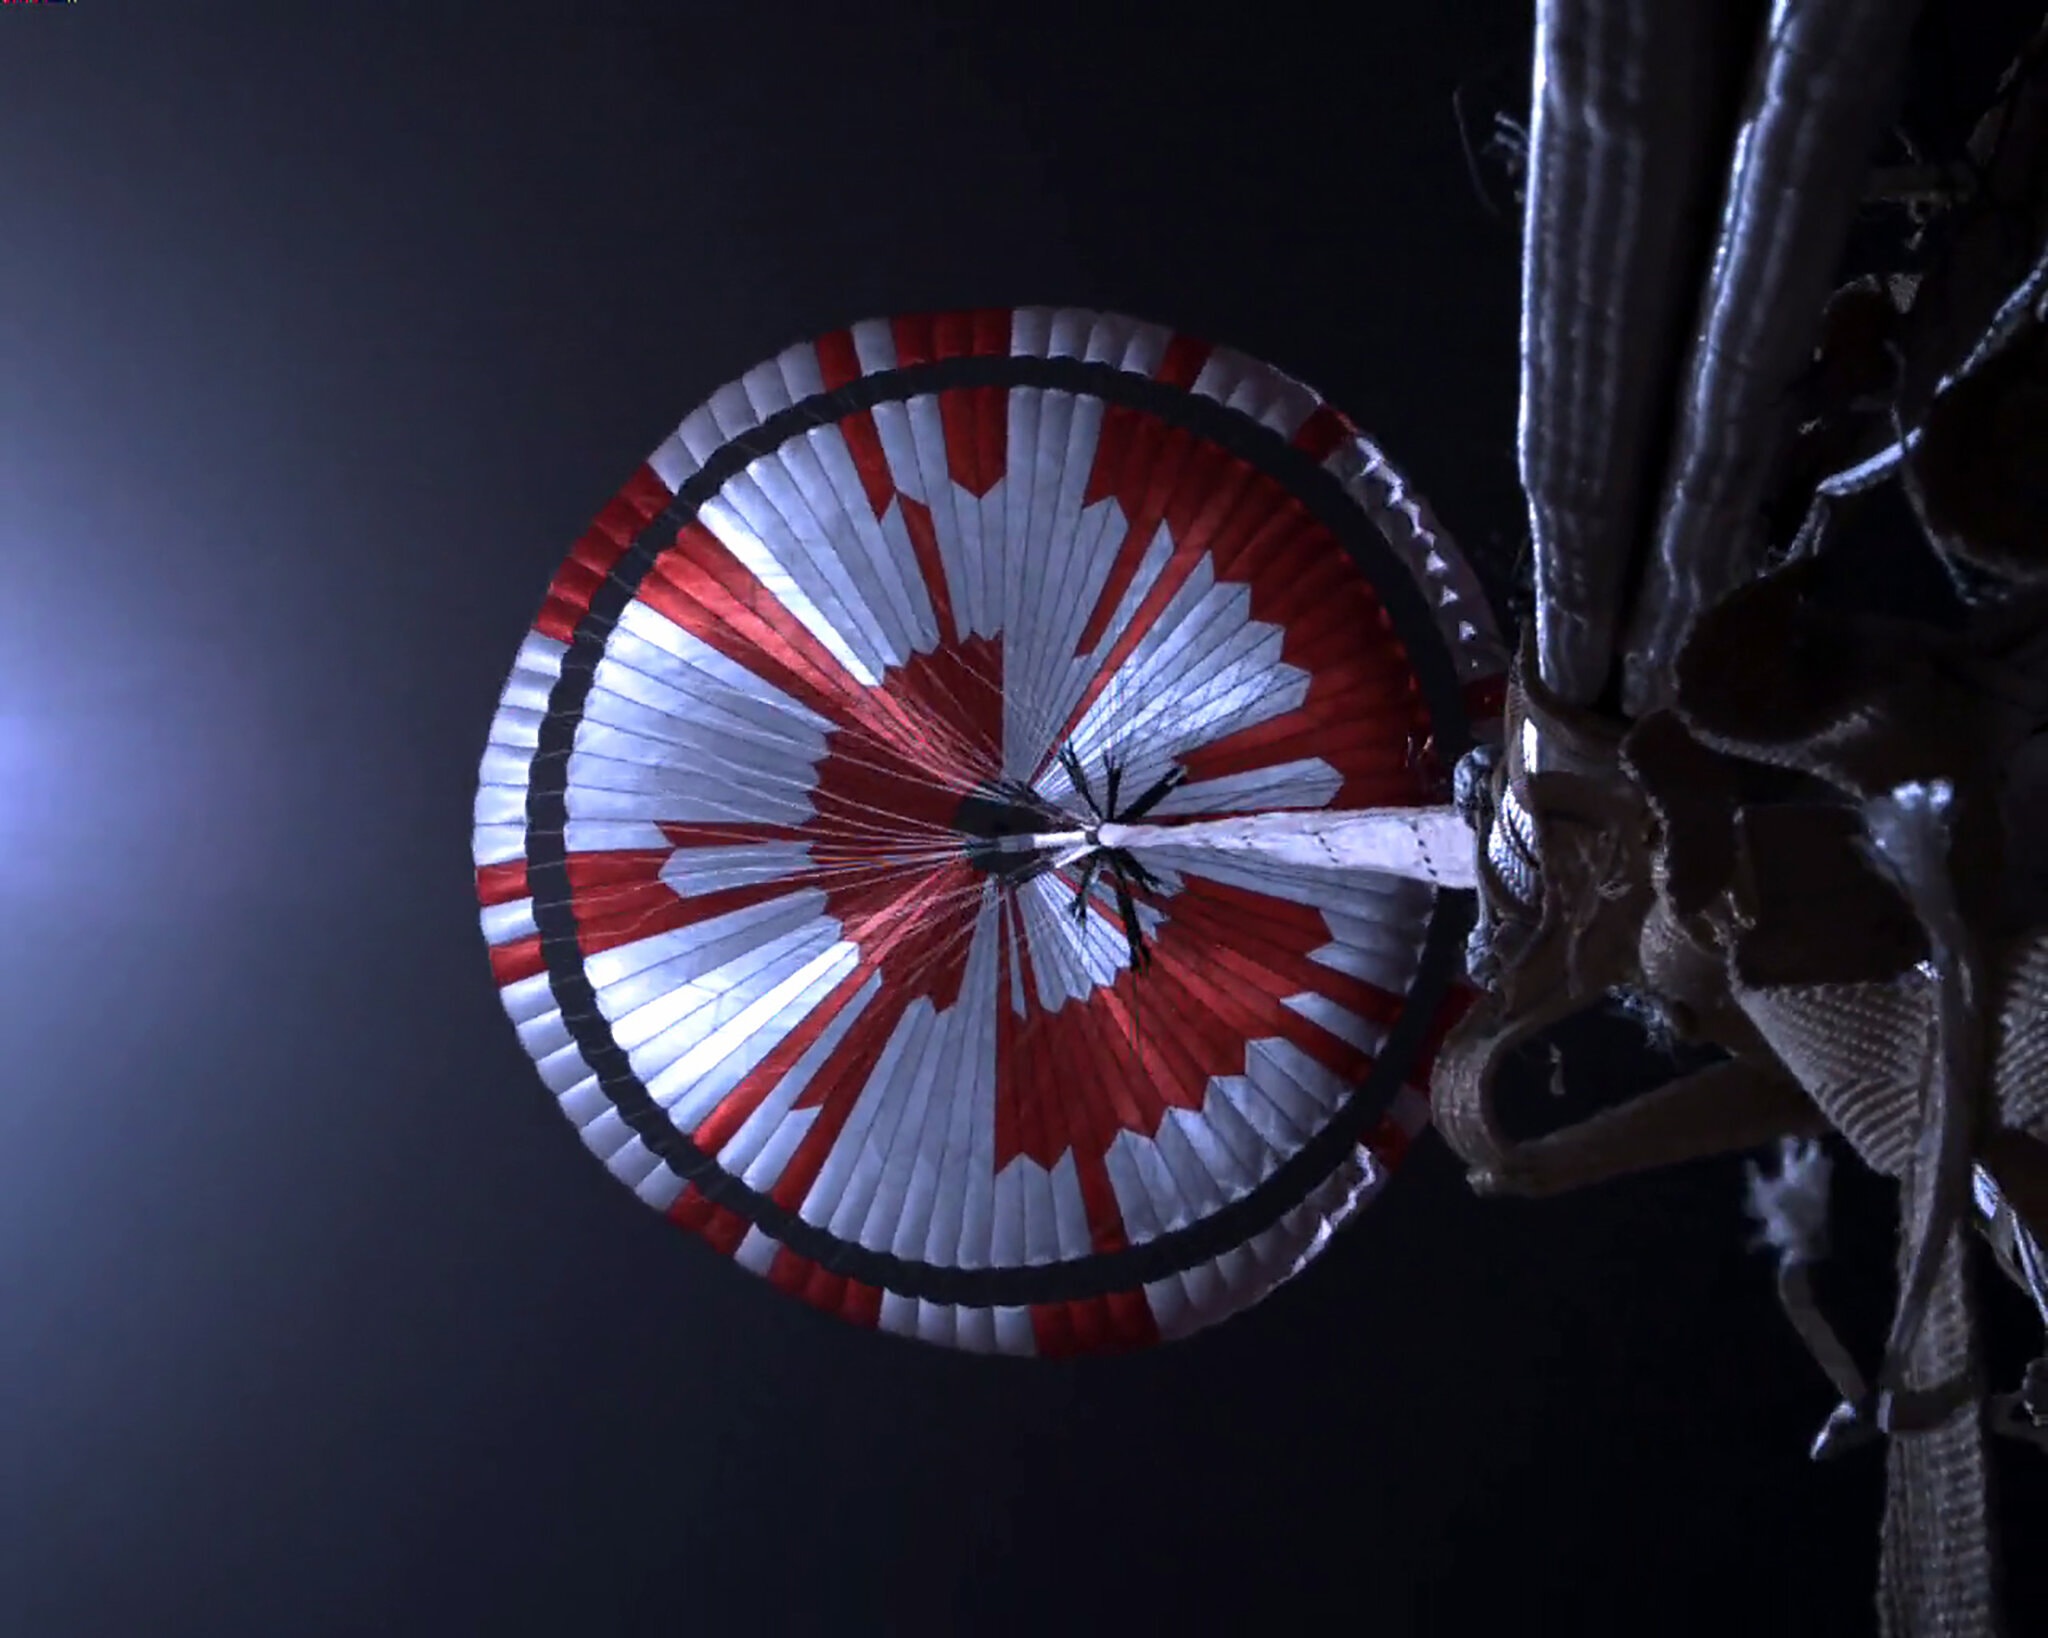 Parachute of the Perseverance rover during landing, with the code "Dare Mighty Things" embedded in the pattern.